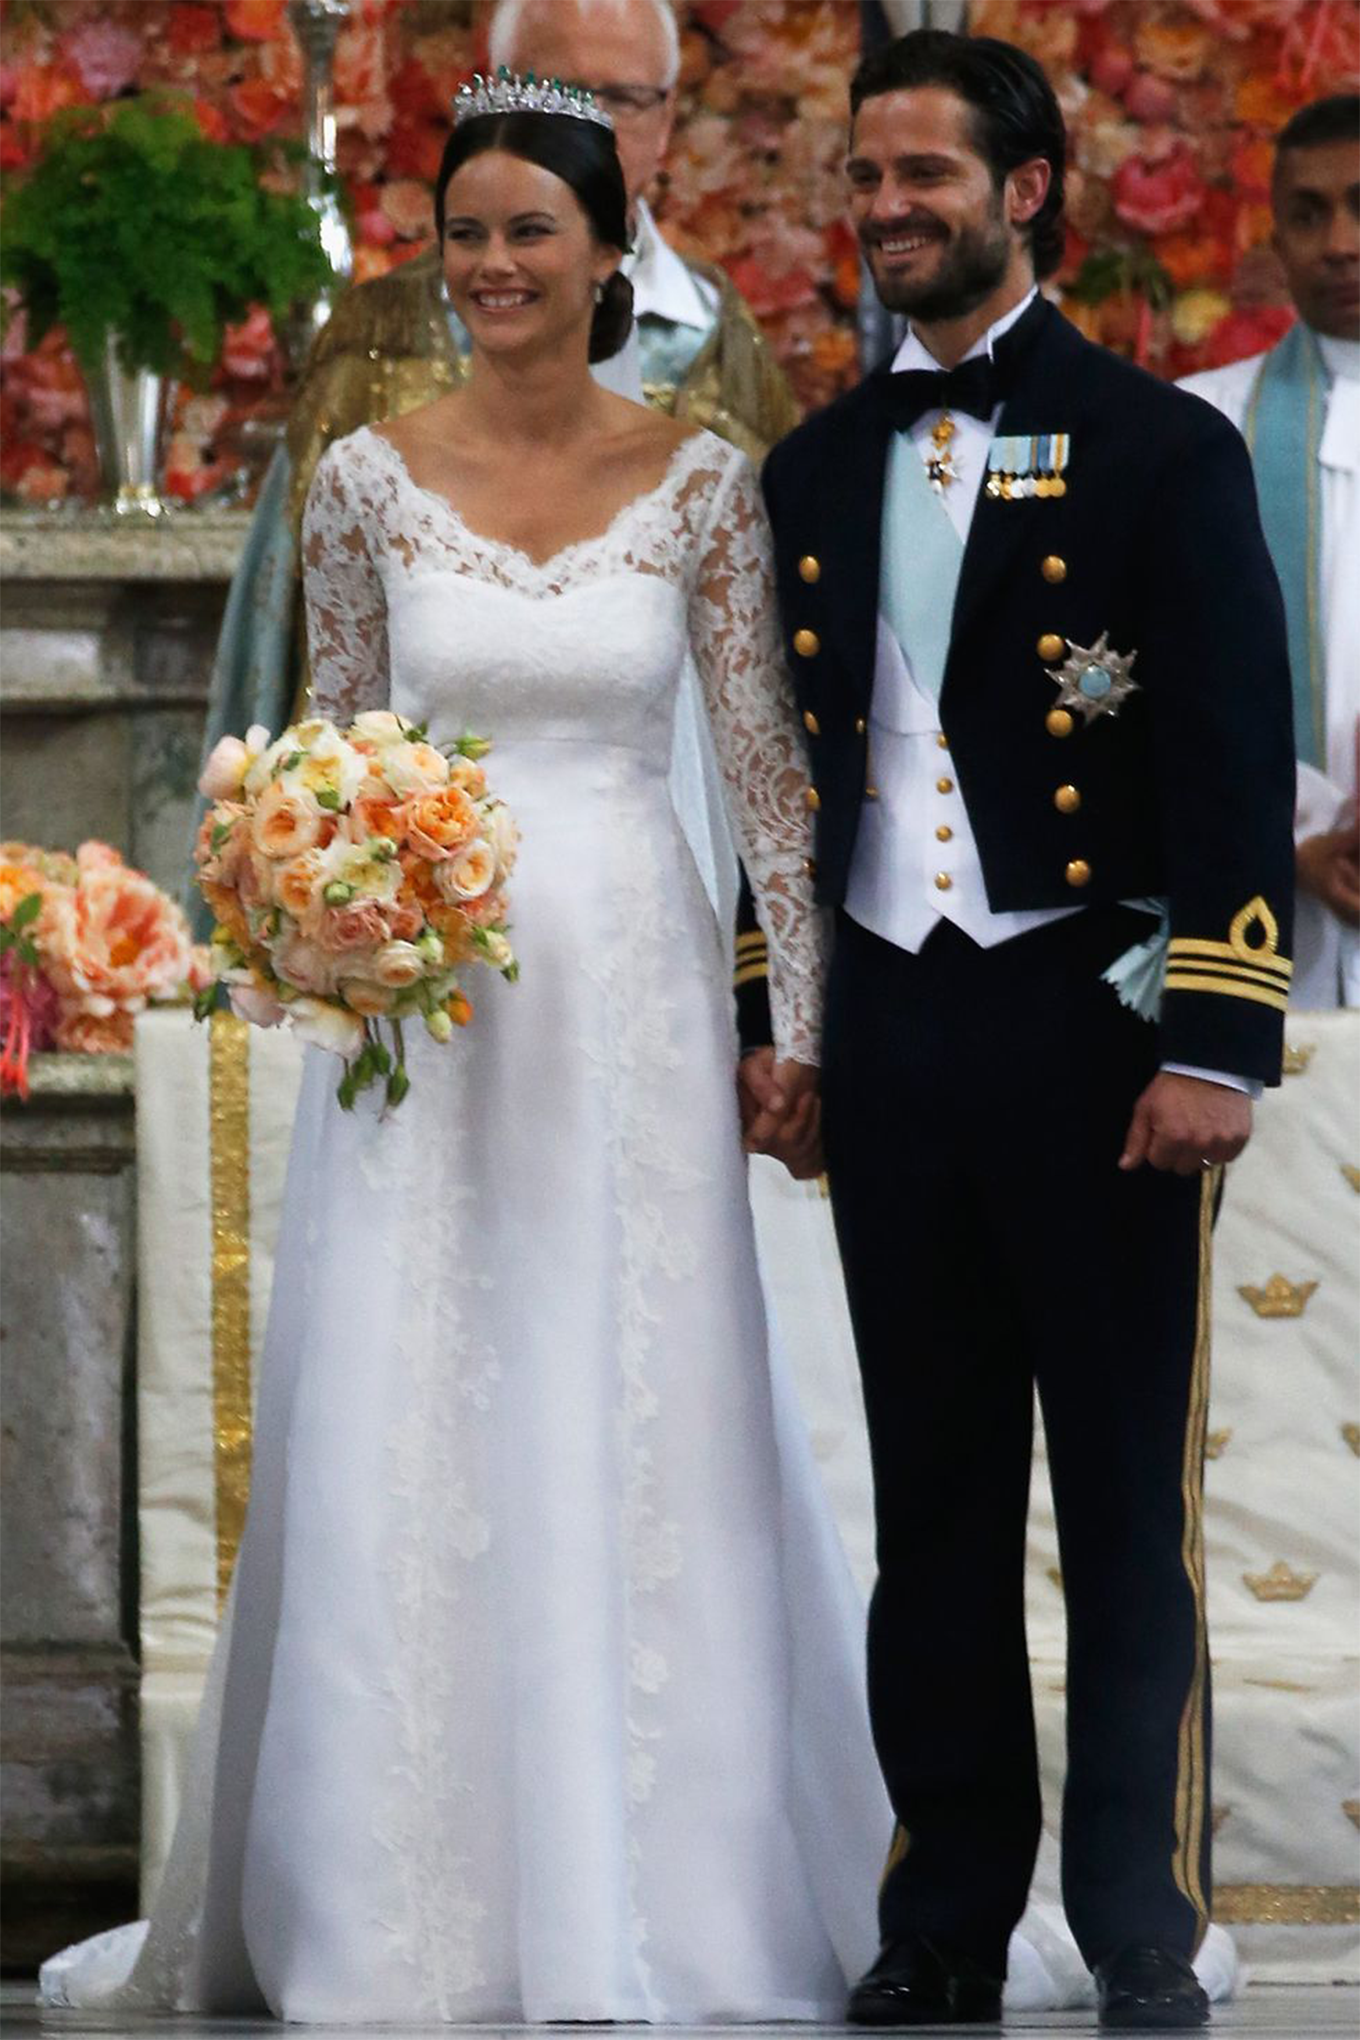 ROYAL BRIDES & THEIR WEDDING DRESSES - SHOEGAL OUT IN THE WORLD